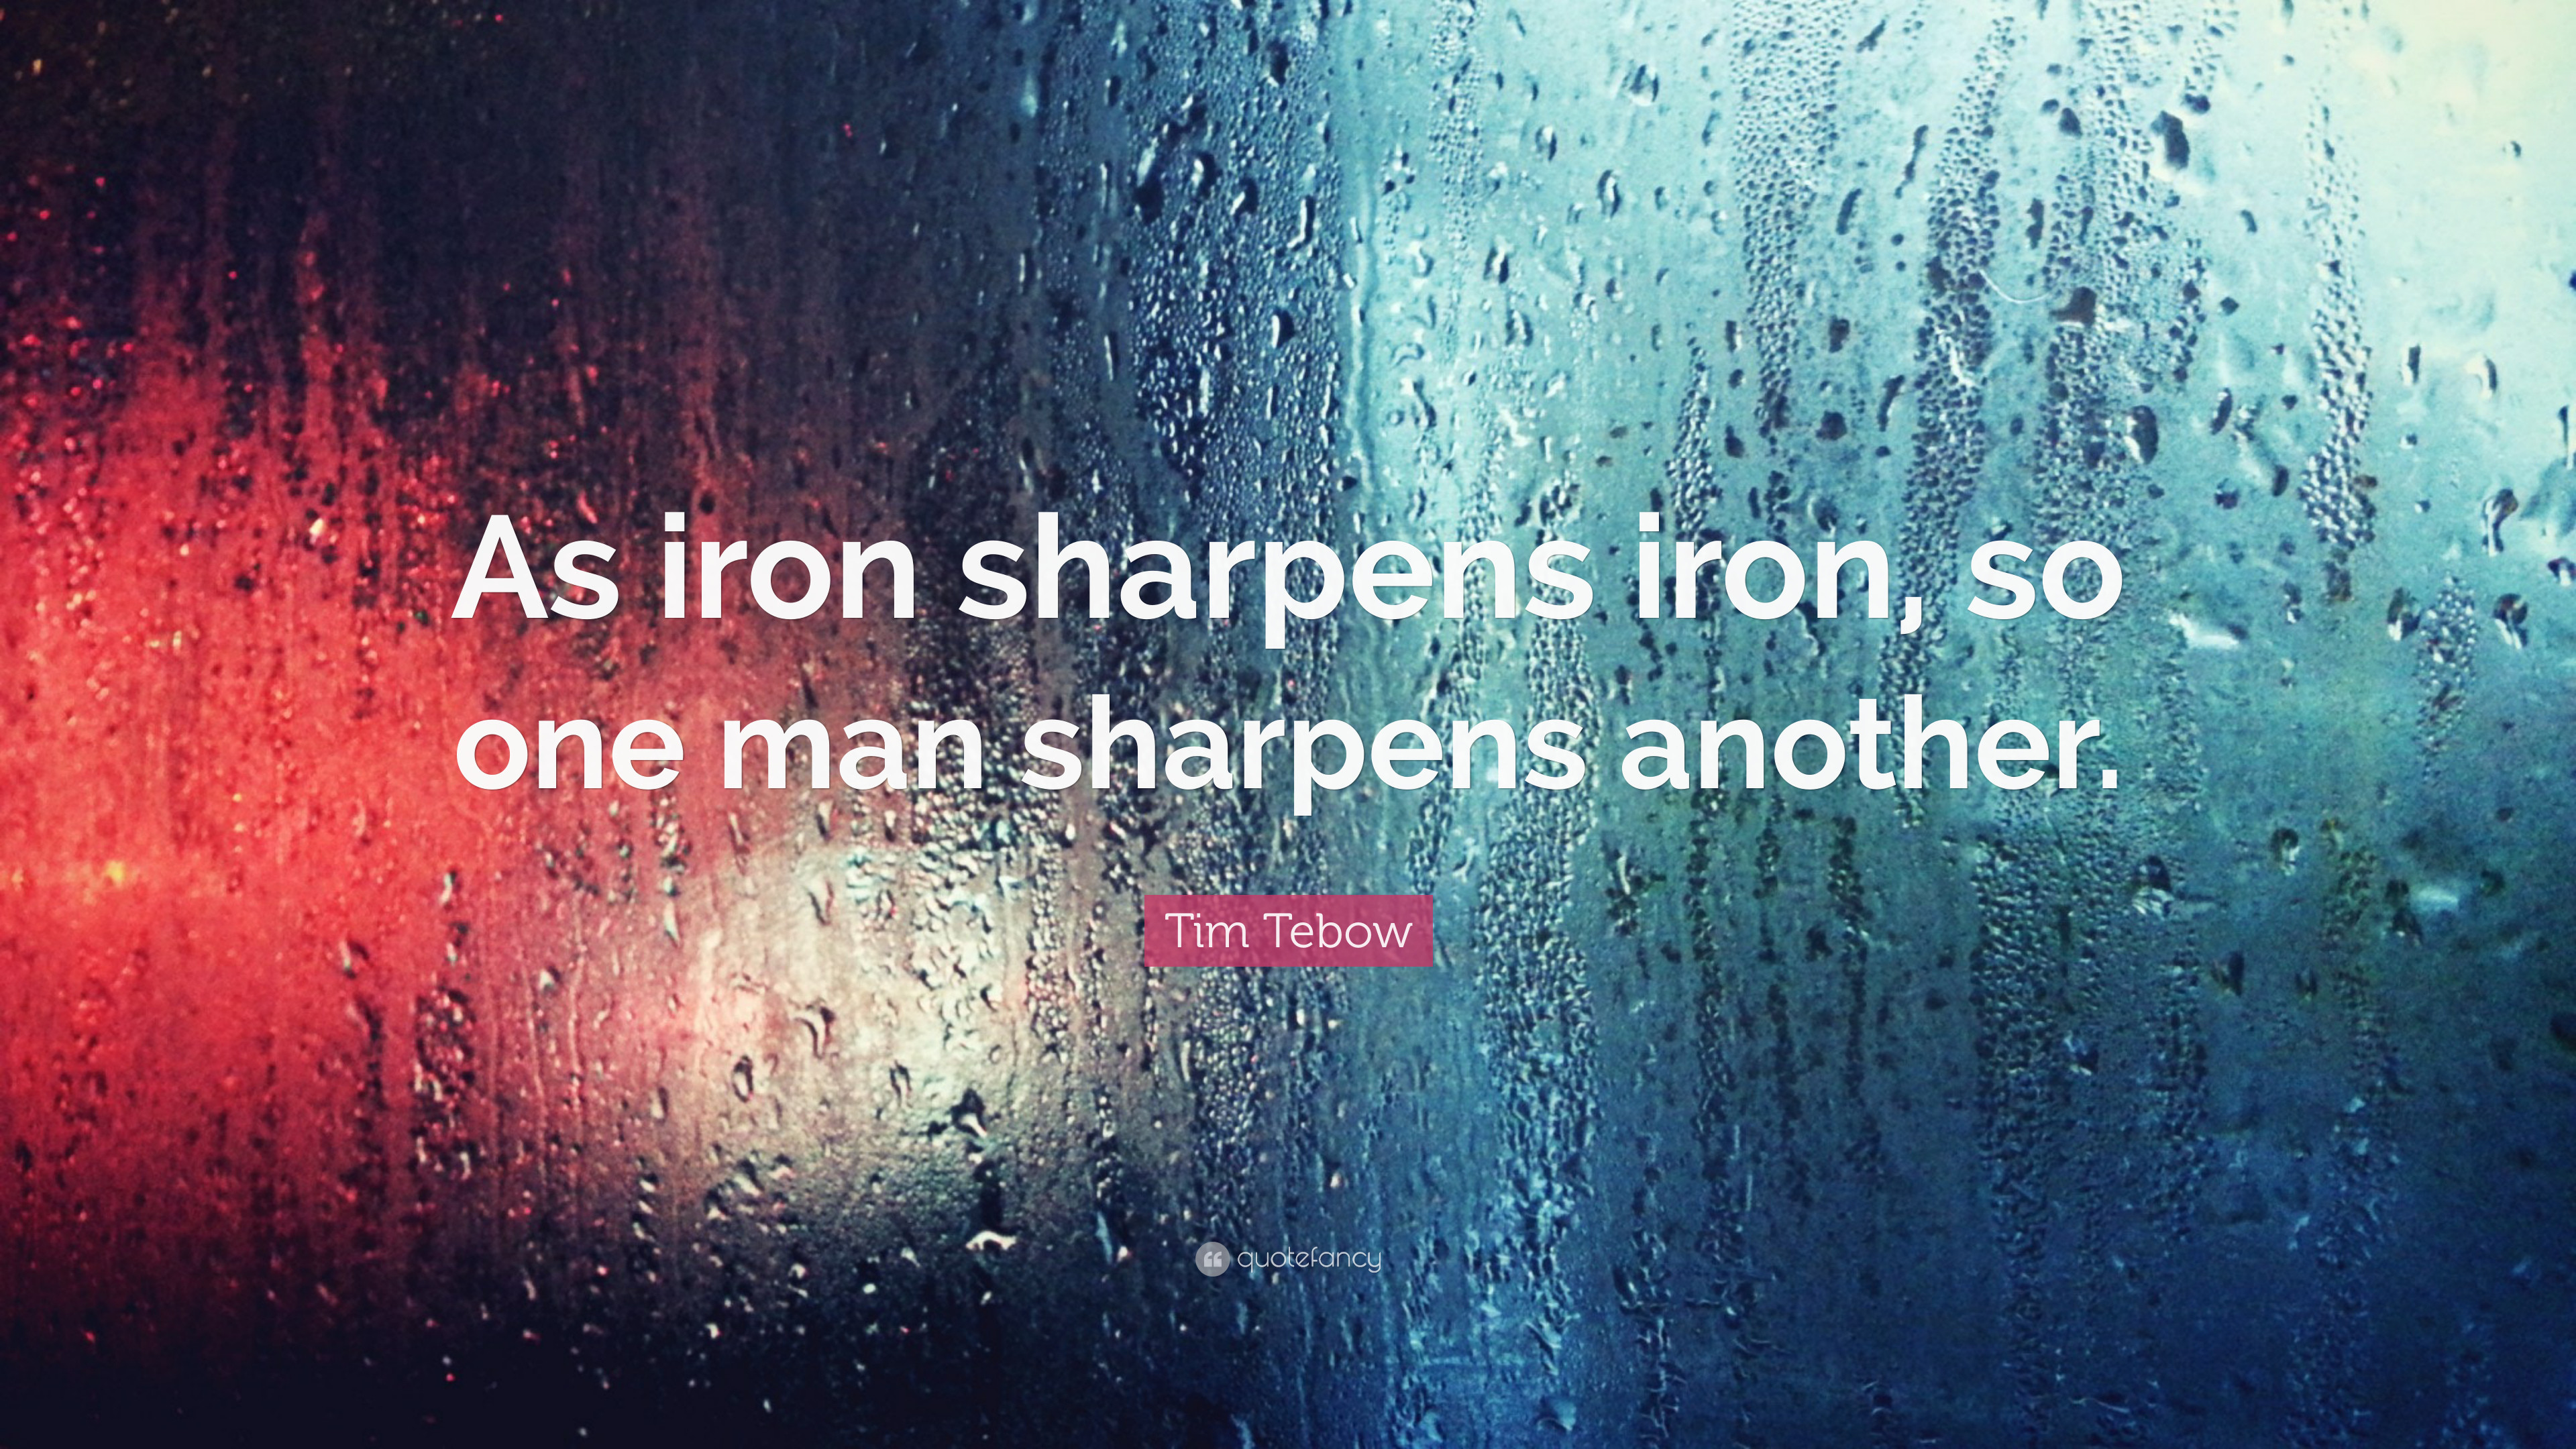 3840x2160 Tim Tebow Quote: “As iron sharpens iron, so one man sharpens another.